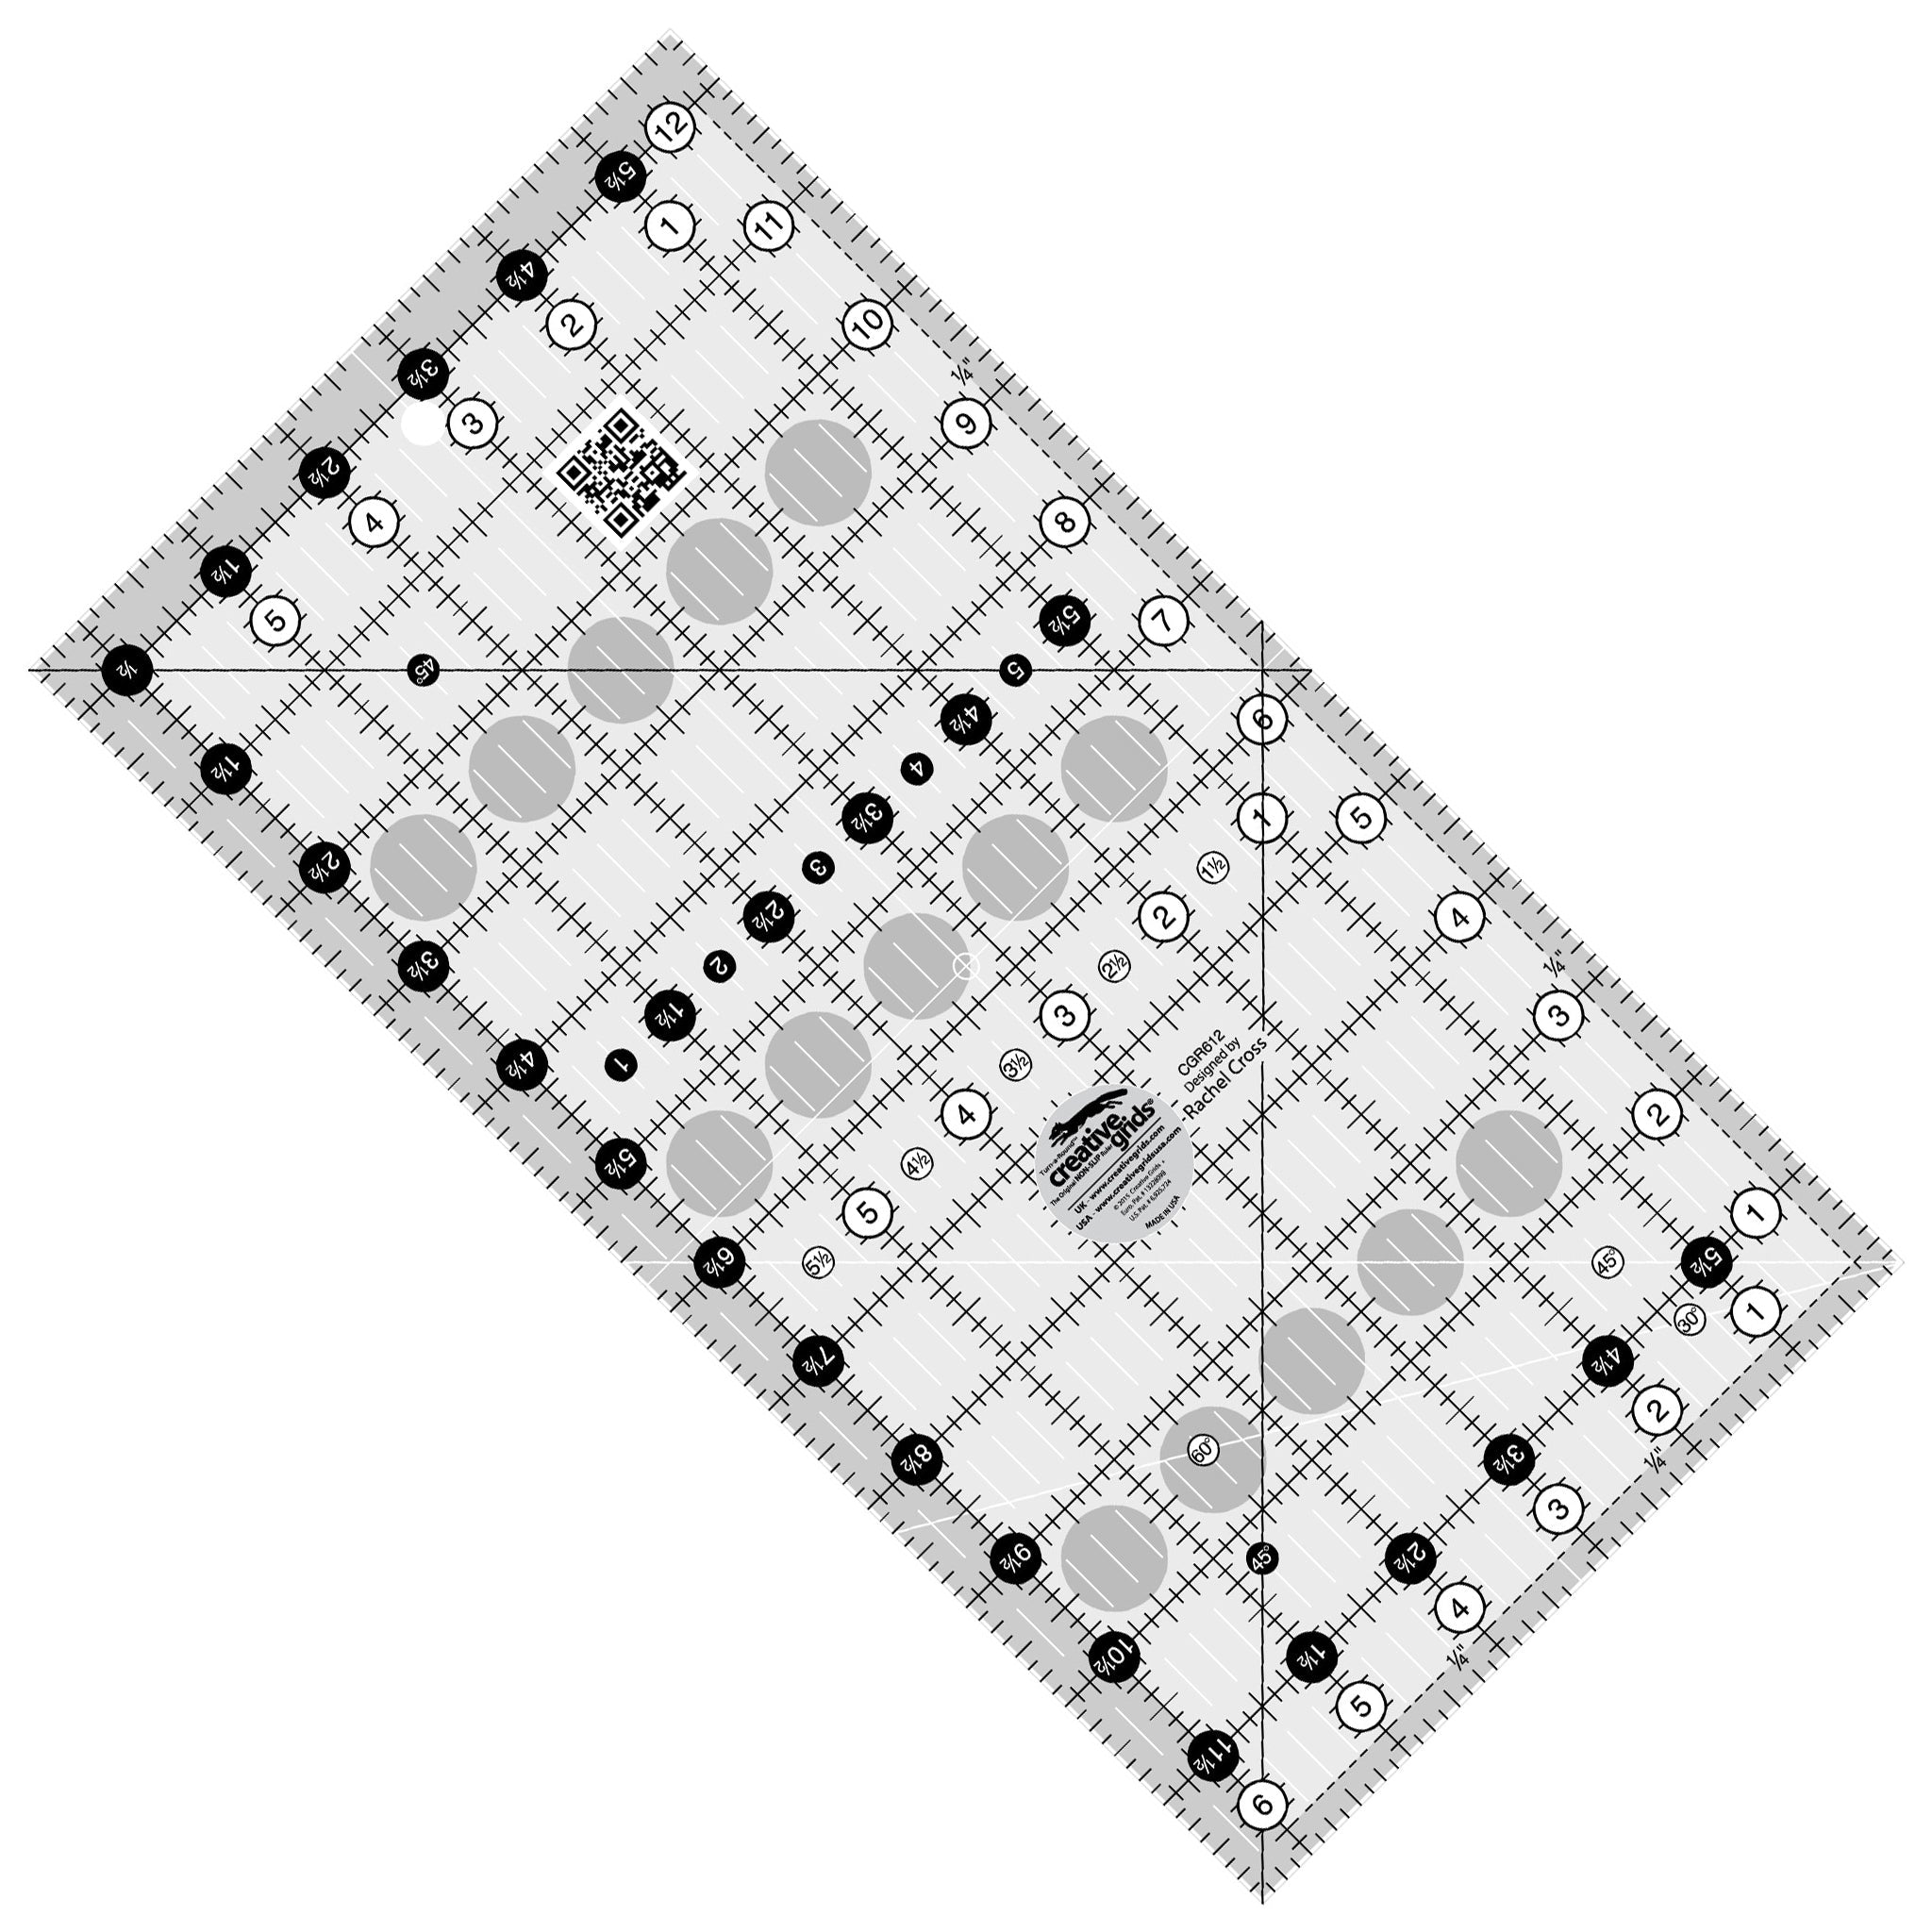 Creative Grids 6-1/2-Inch X 12-1/2-Inch Quilt Ruler (CGR612)